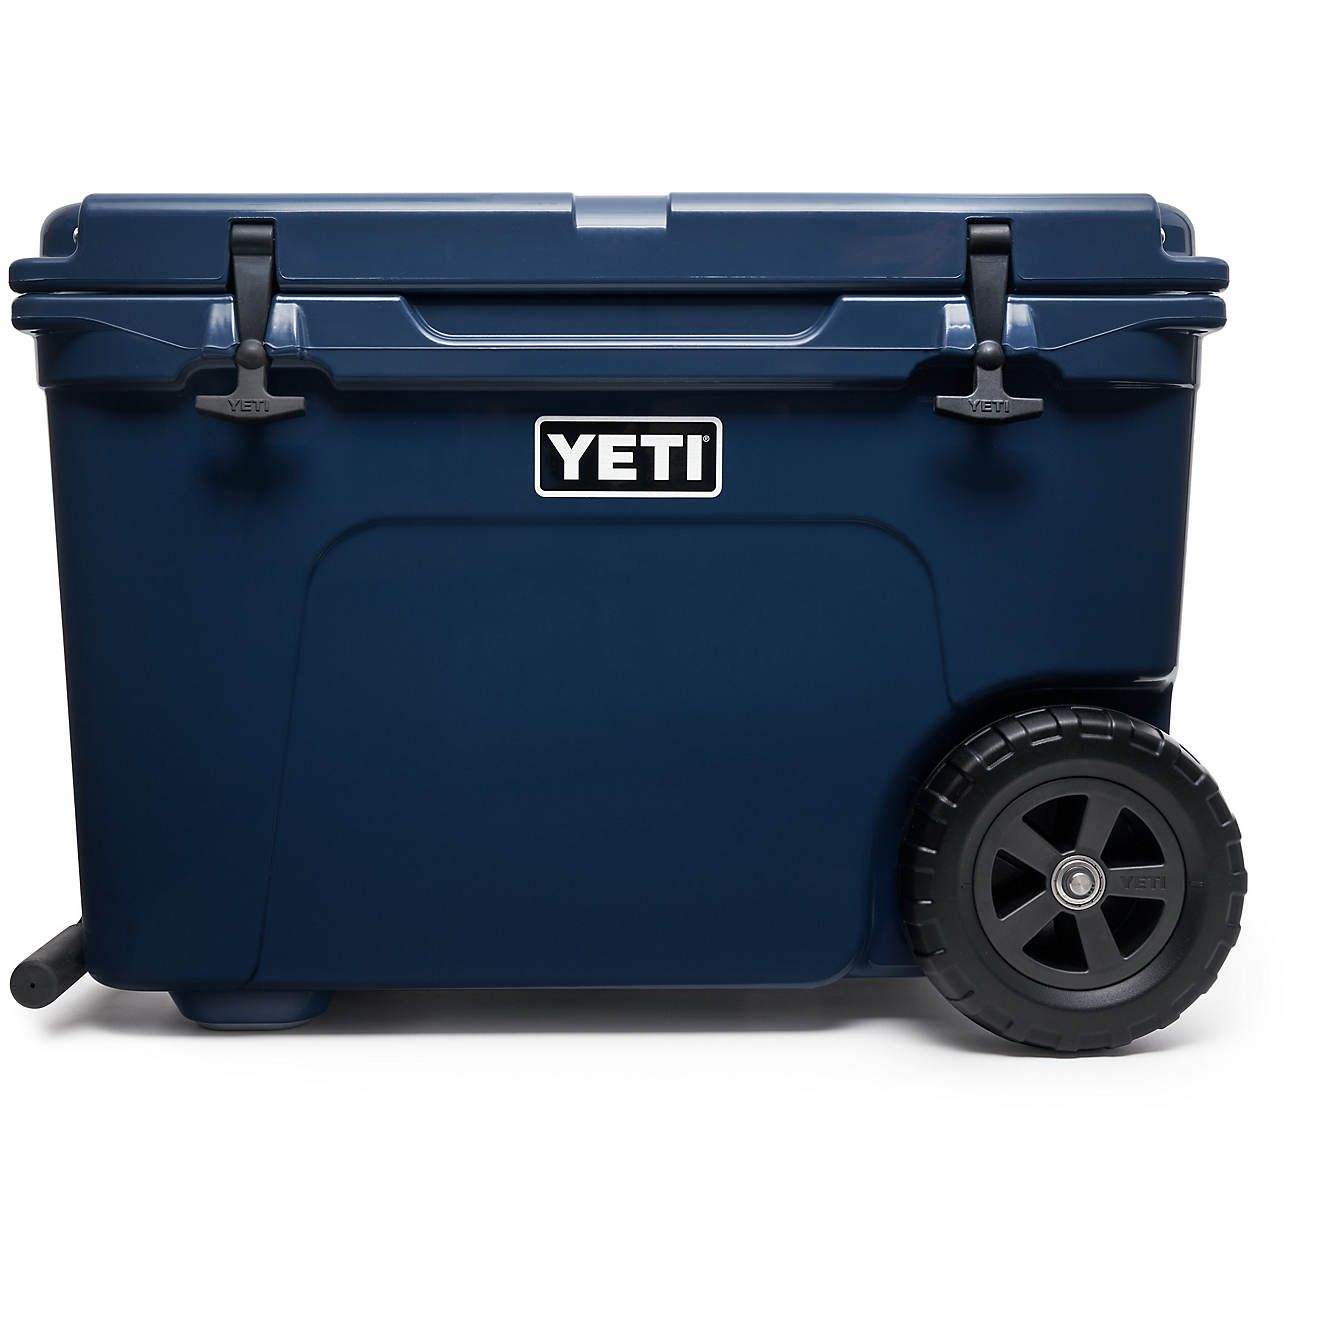 YETI Tundra Haul Cooler | Academy Sports + Outdoor Affiliate